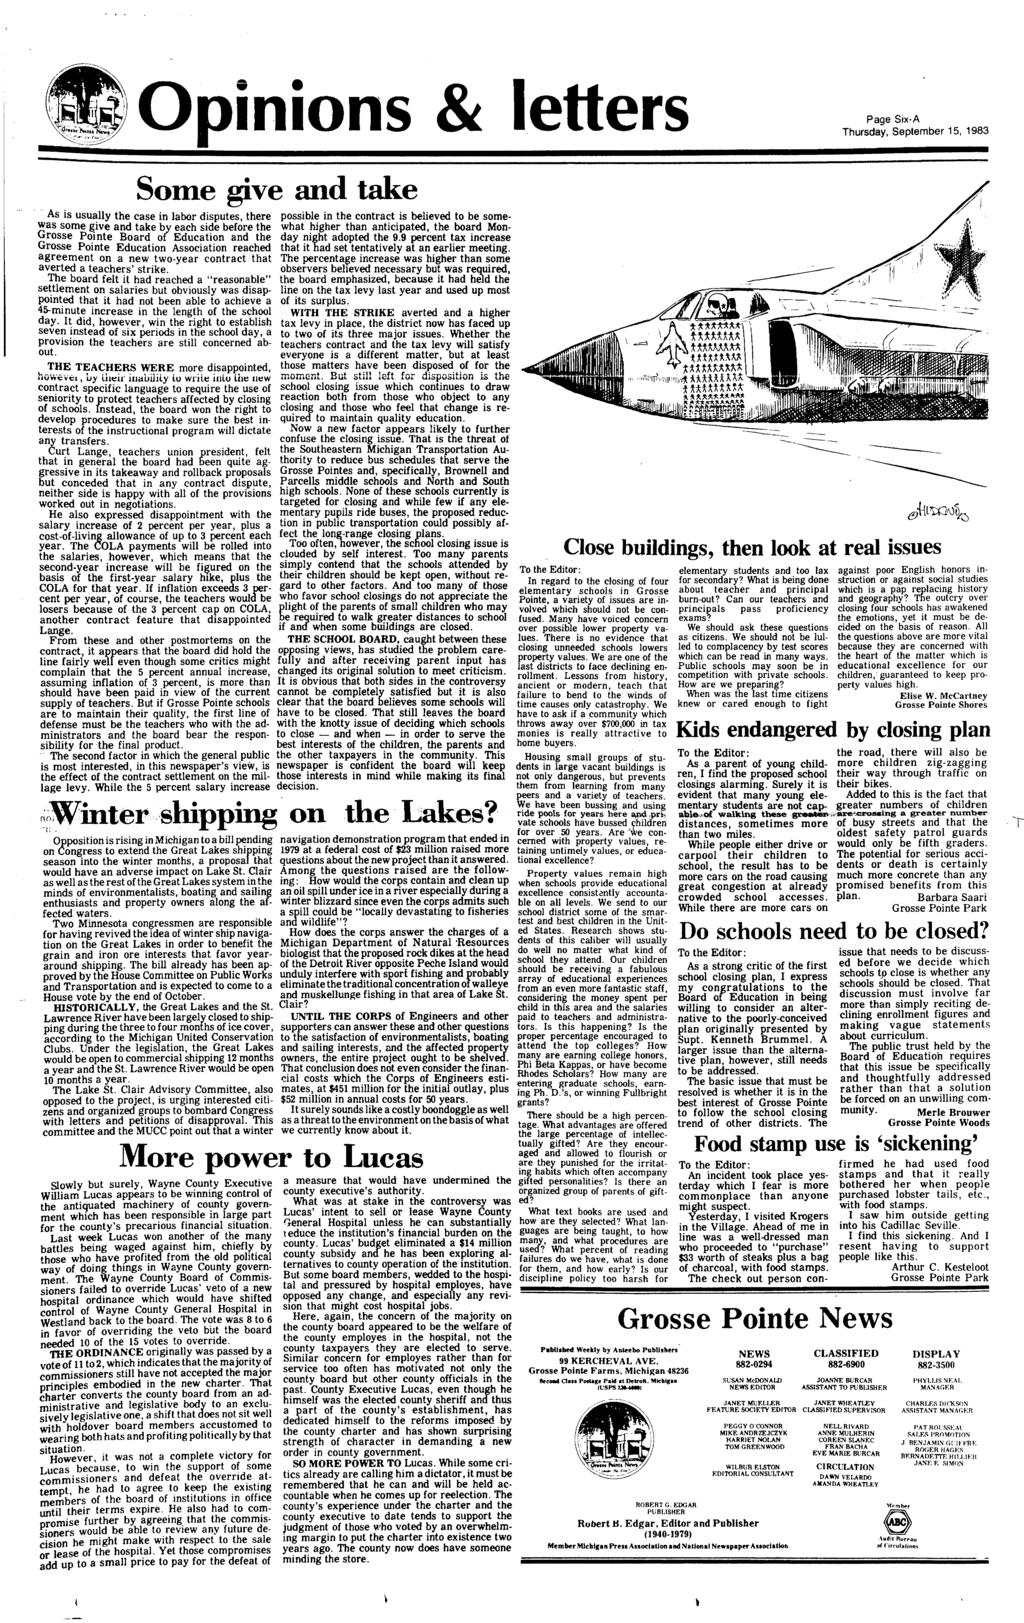 Opinions & letters Page Slx-A Thursday, September 15, 1983 Some give and take As is usually the case in labor disputes there as some give and take by each Side befre the rosse Pointe Board of